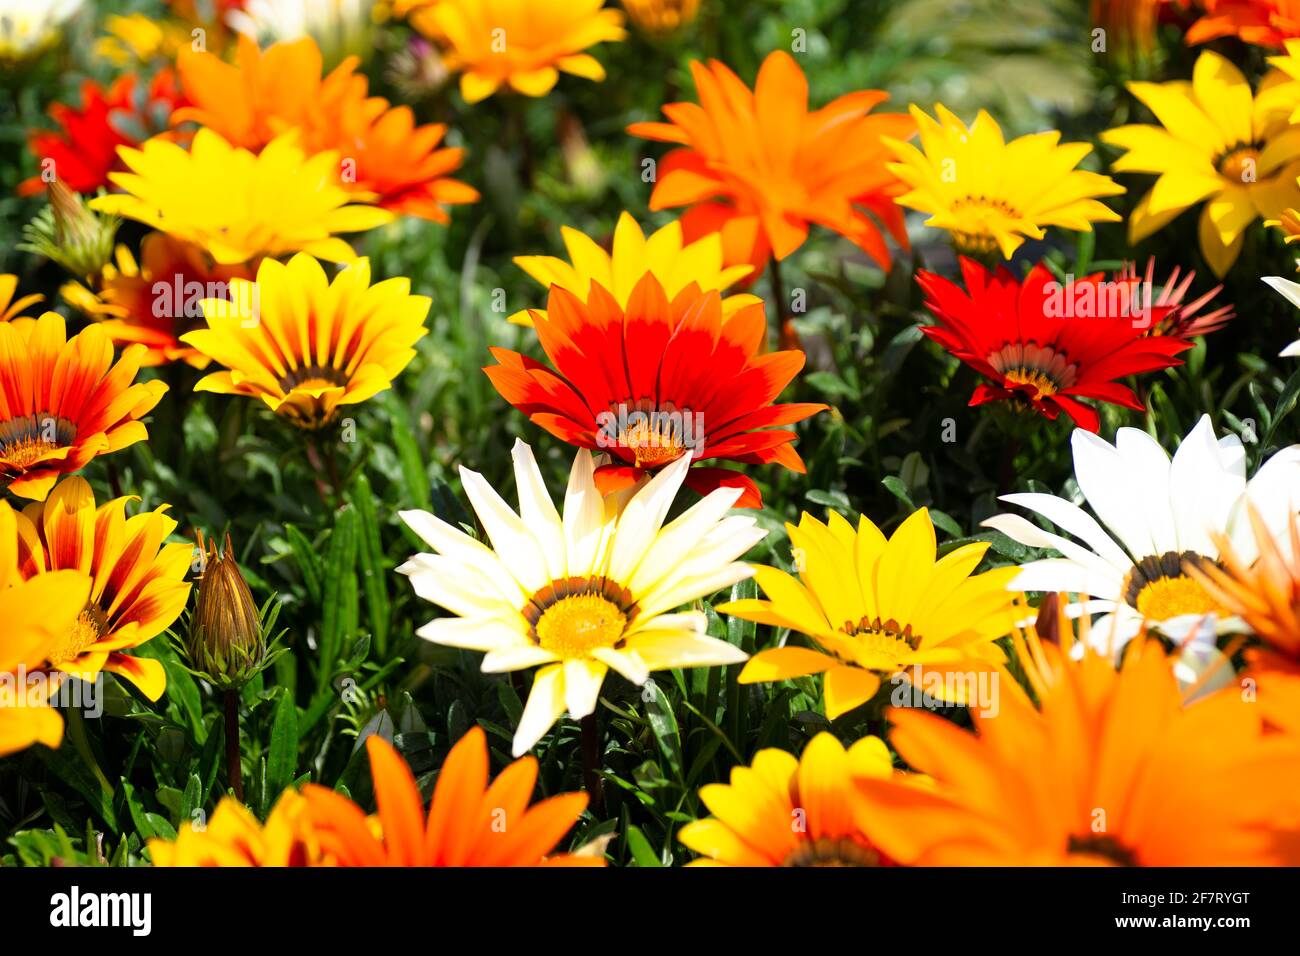 Beautiful group of african daisies (Gazania) in bloom, red, yellow ...